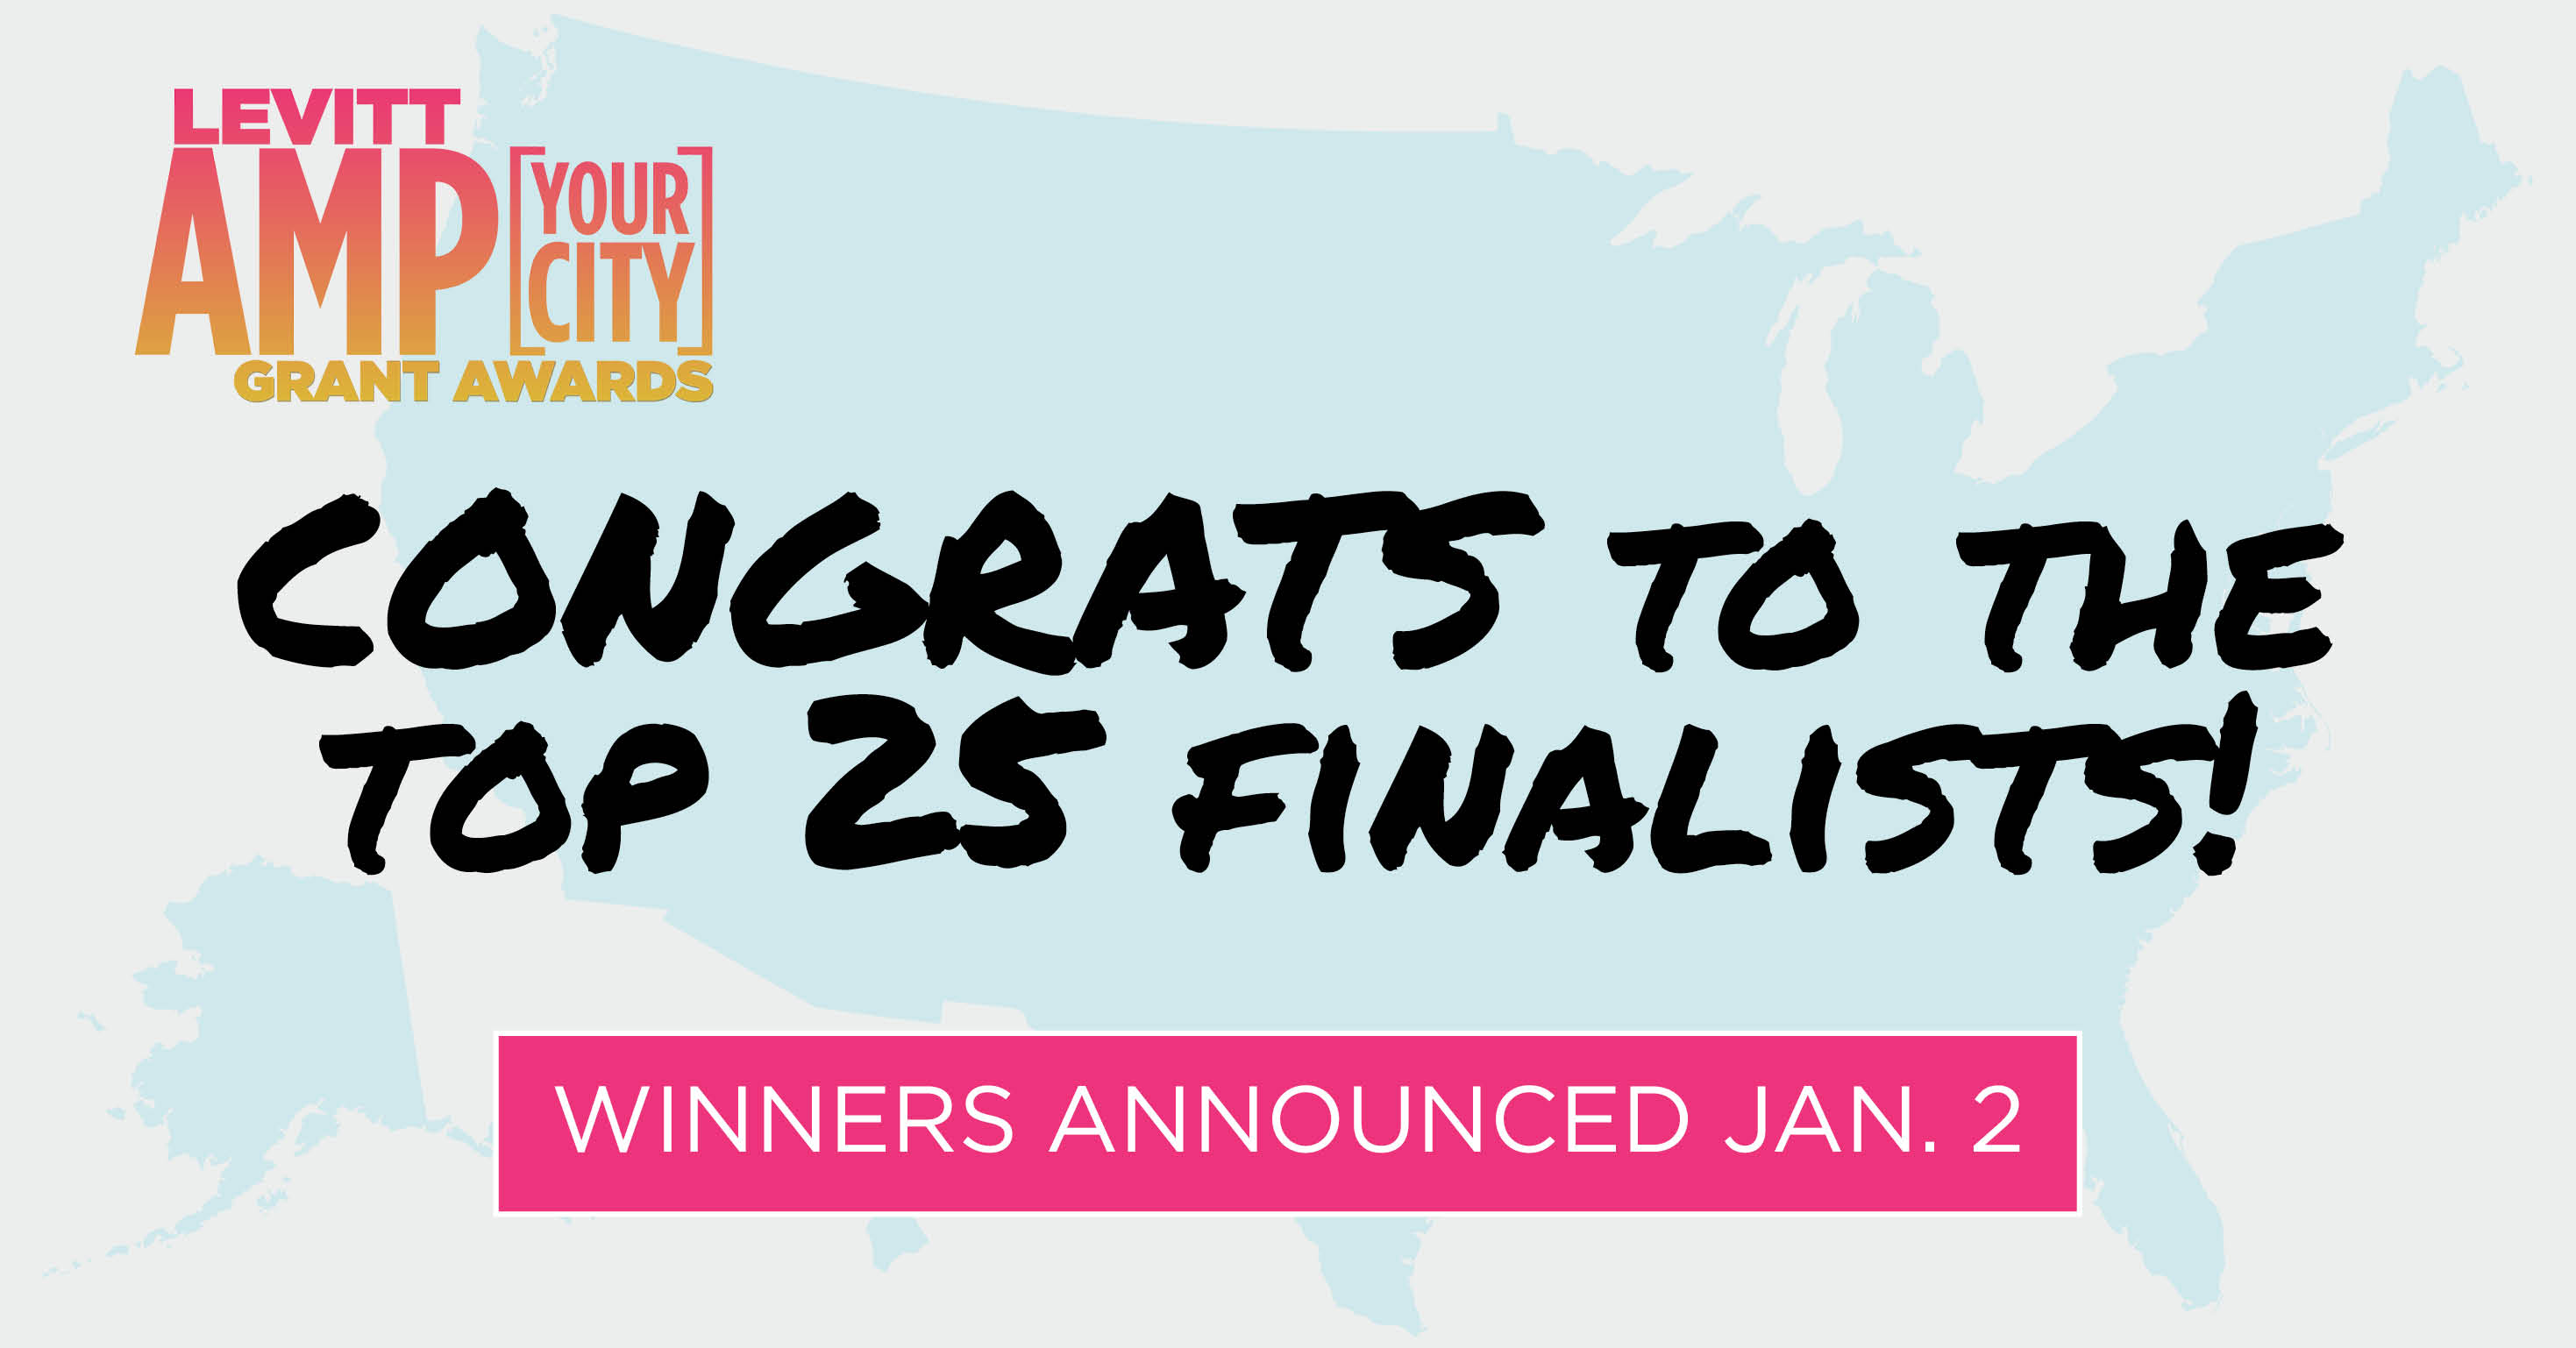 CONGRATS TO THE TOP 25 FINALISTS